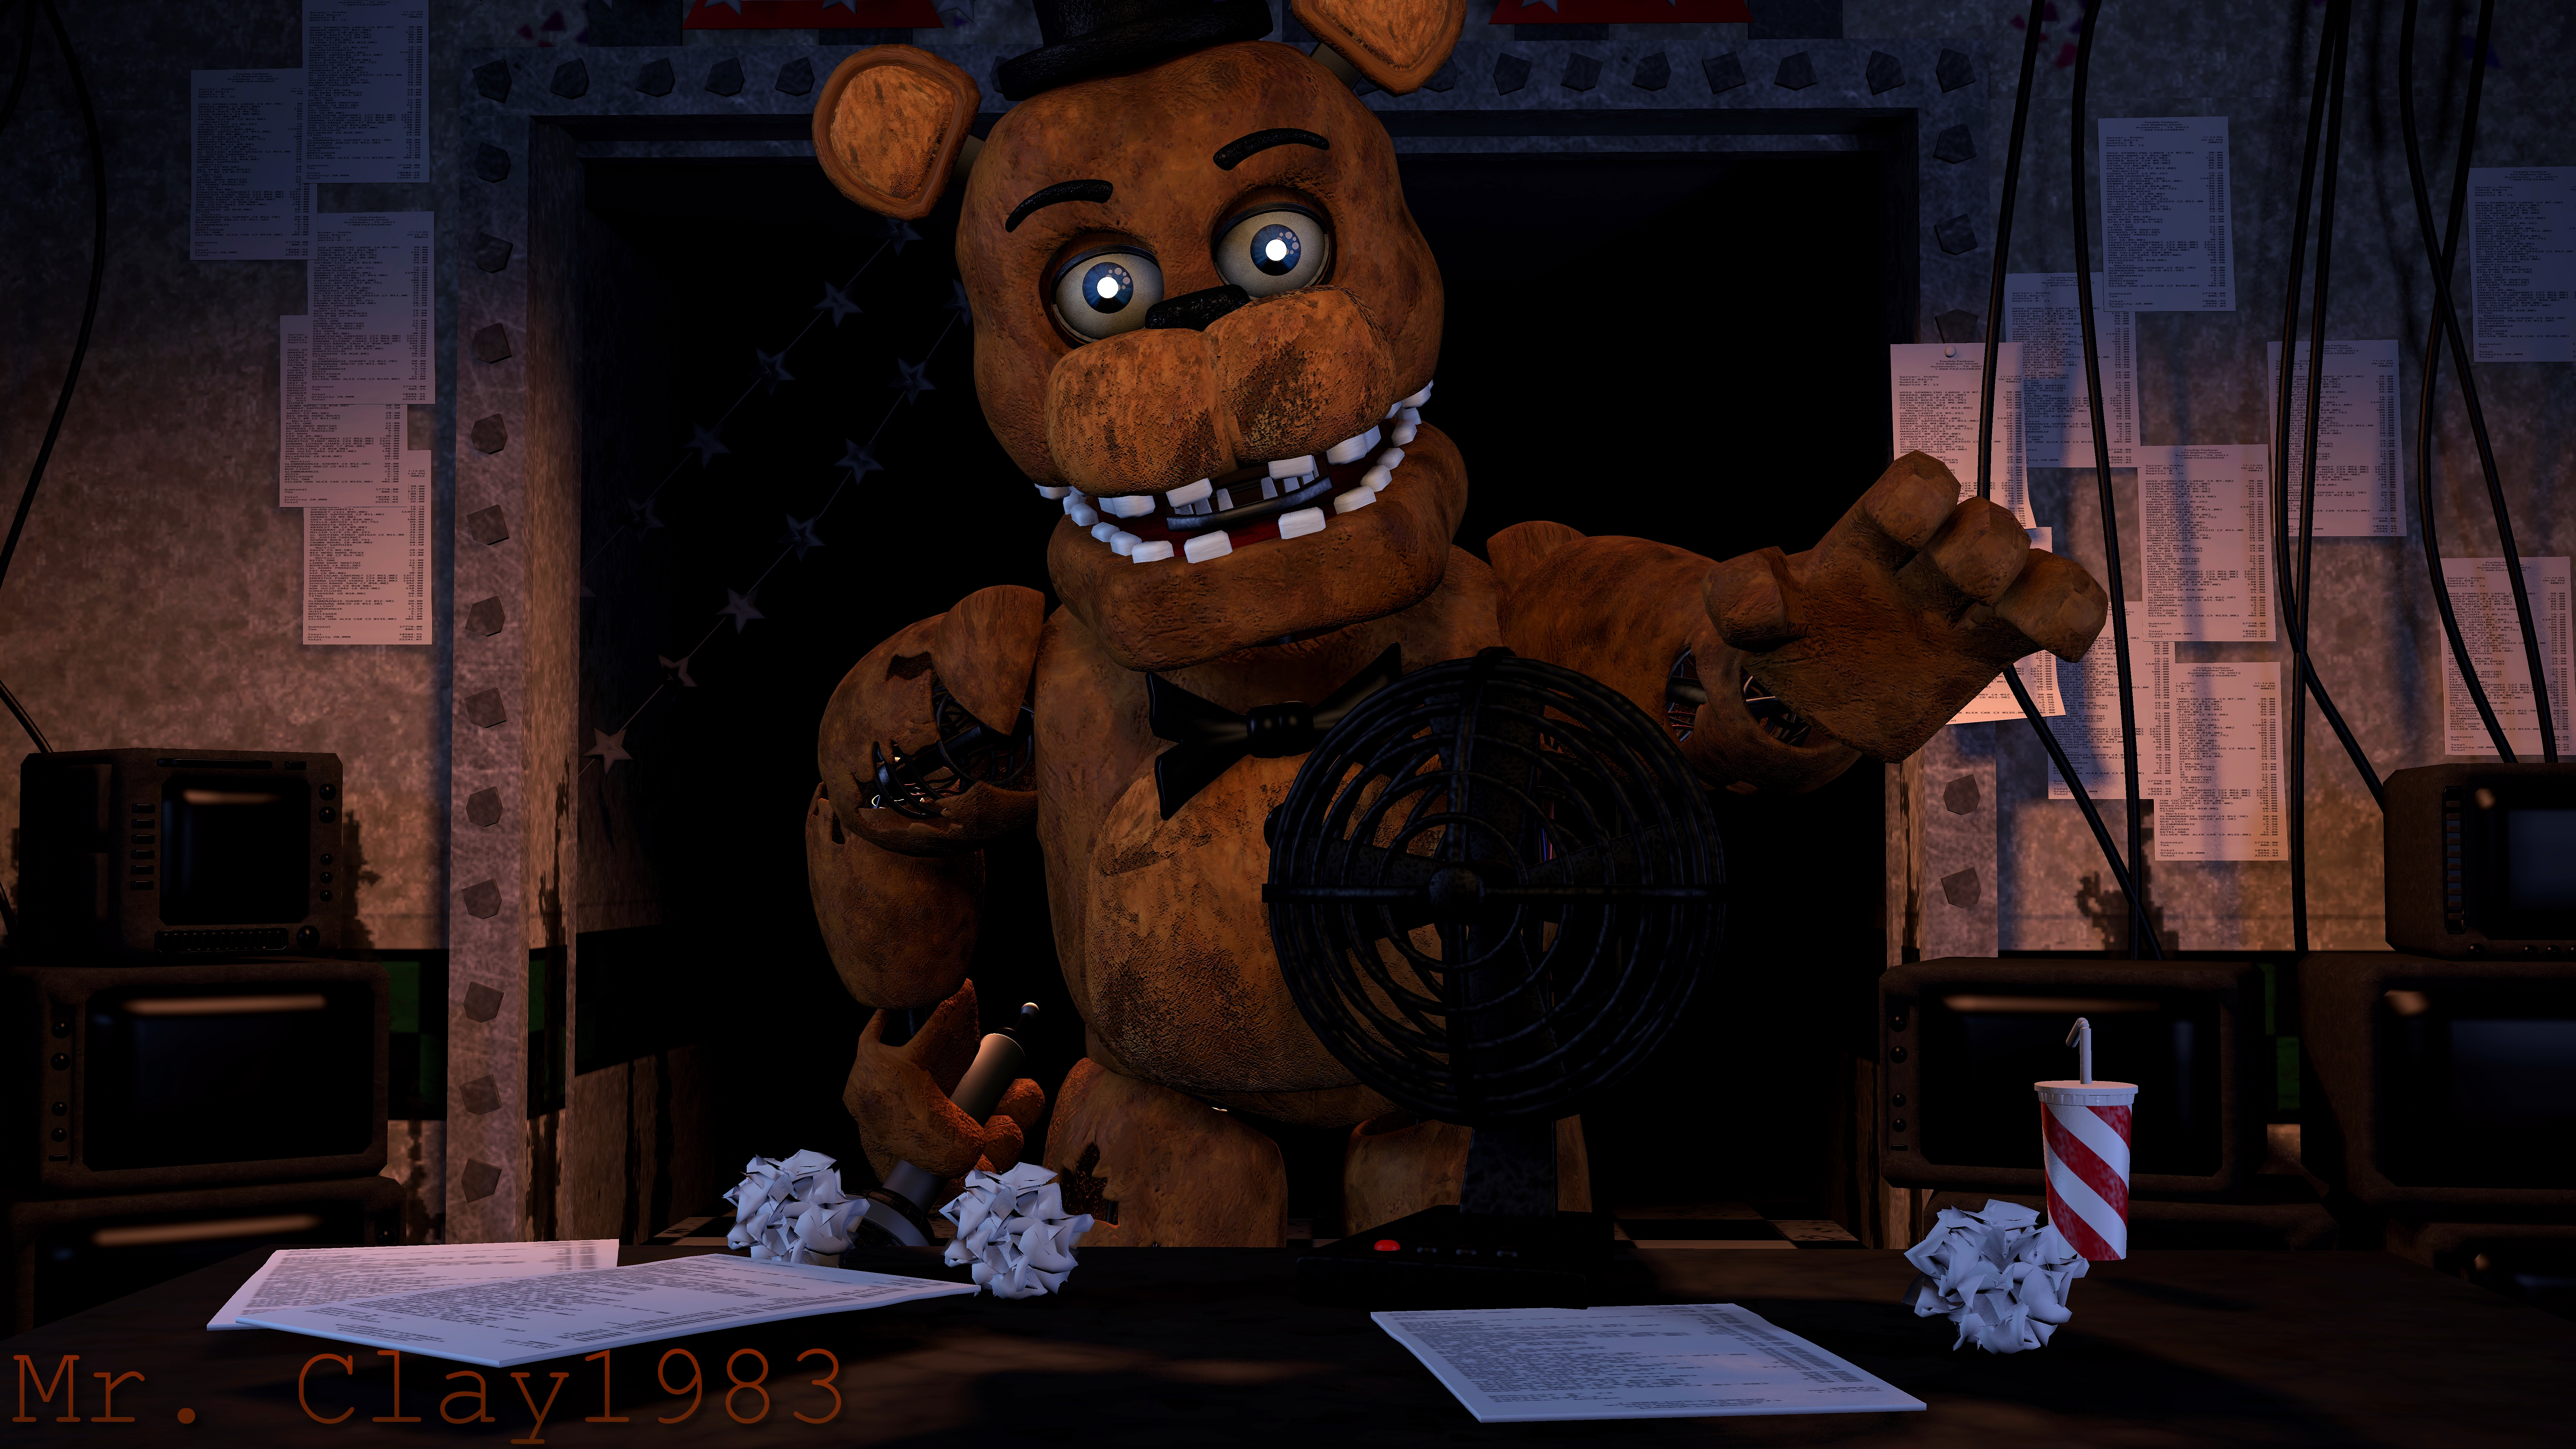 Withered Freddy Updated [DOWNLOAD] by CoolioArt on DeviantArt